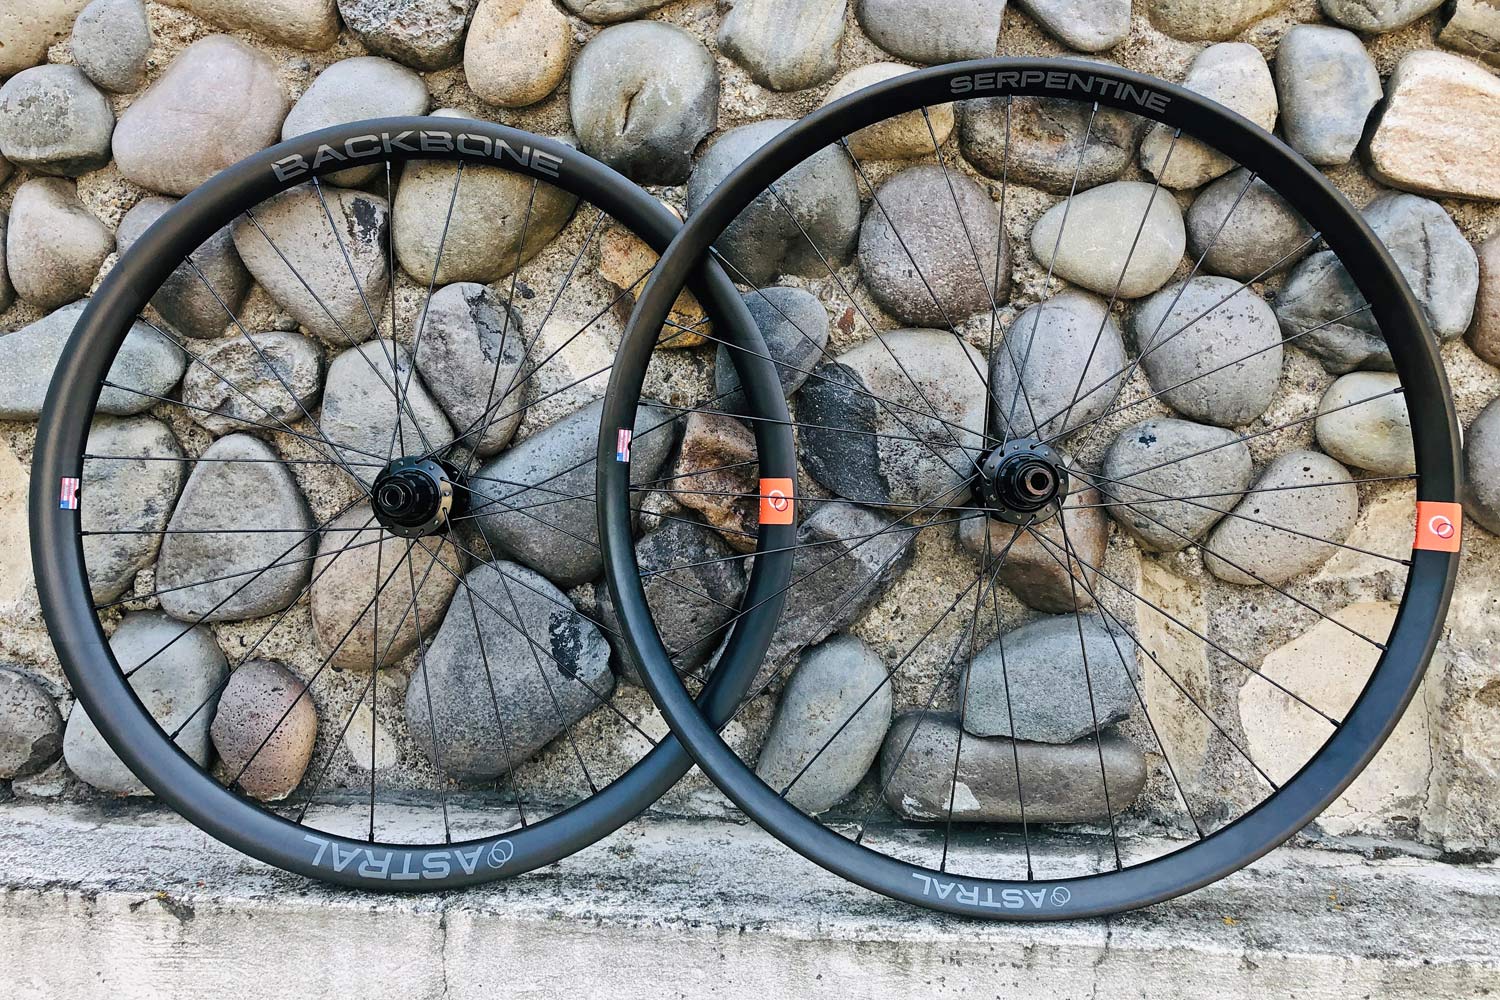 Astral-wide-MTB-rims-wheels_275-Backbone_29-Serpentine_aluminum-alloy-carbon-mountain-bike-wheels_Made-in-the-USA-by-Rolf-Prima_American-made-carbon-wheels.jpg